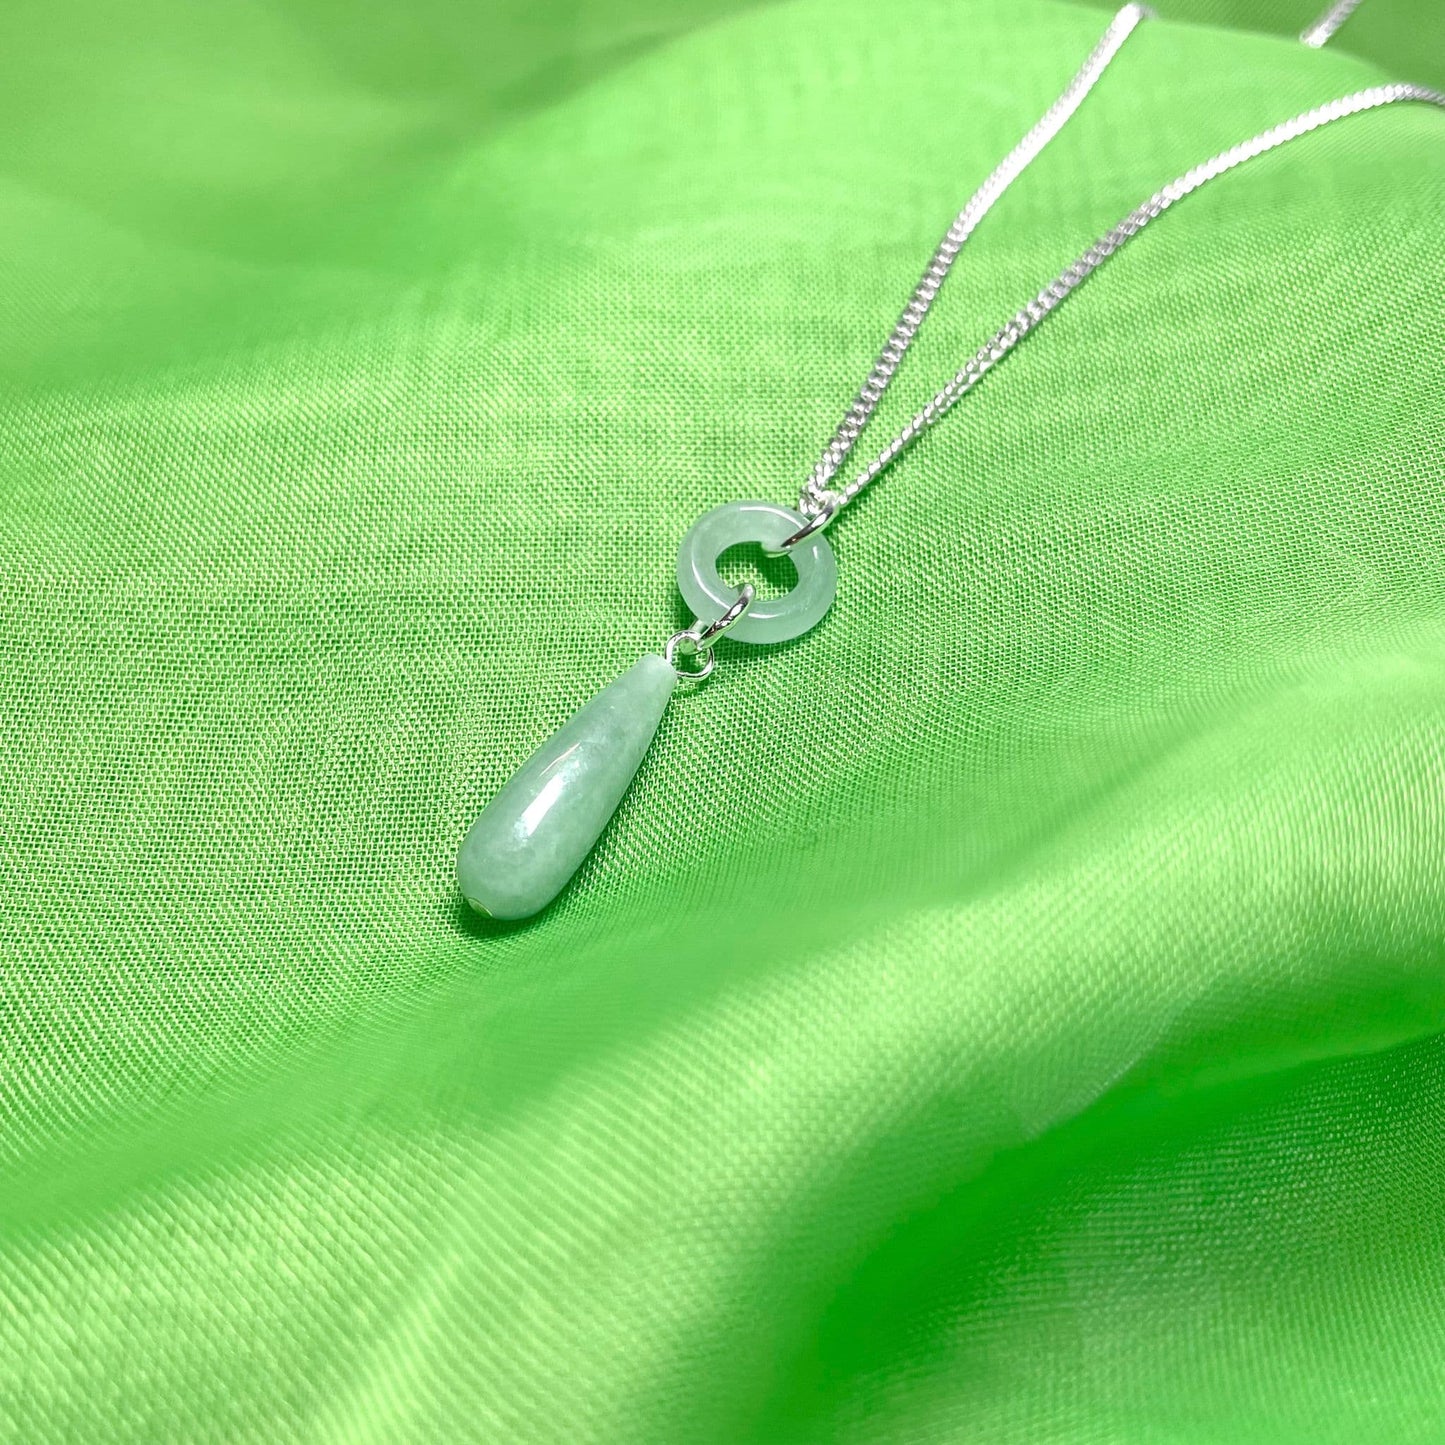 Tear Drop And Circle Silver Pear Shaped Green Jade Necklace Pendant